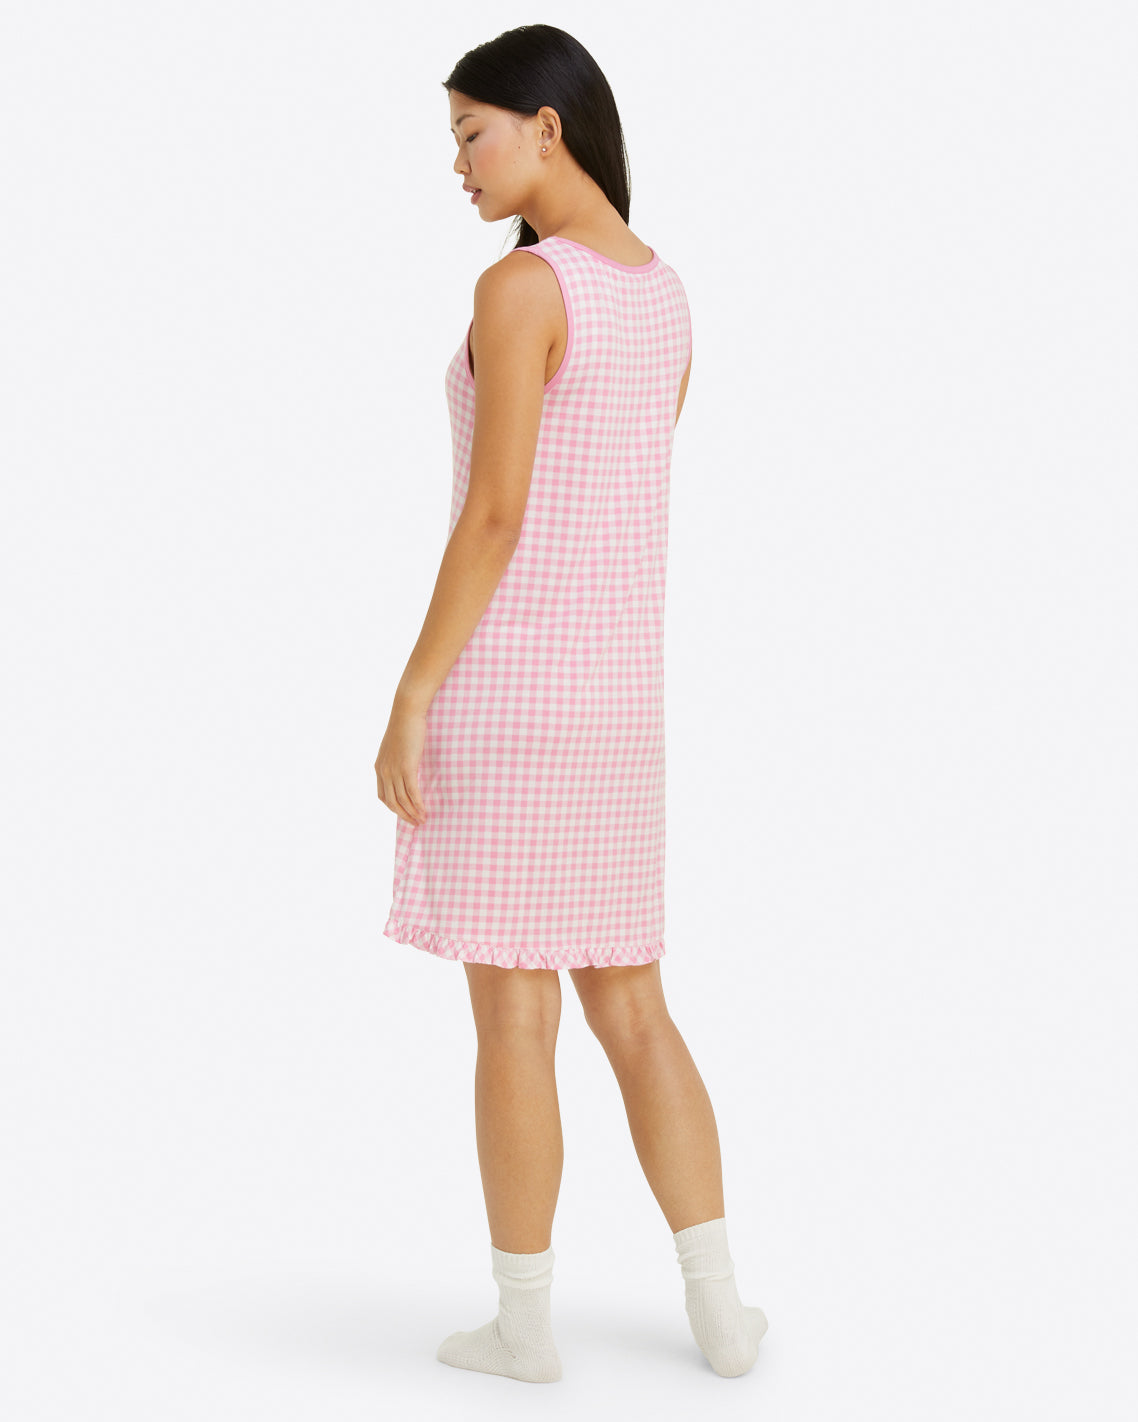 Alison Nightgown in Light Pink Gingham